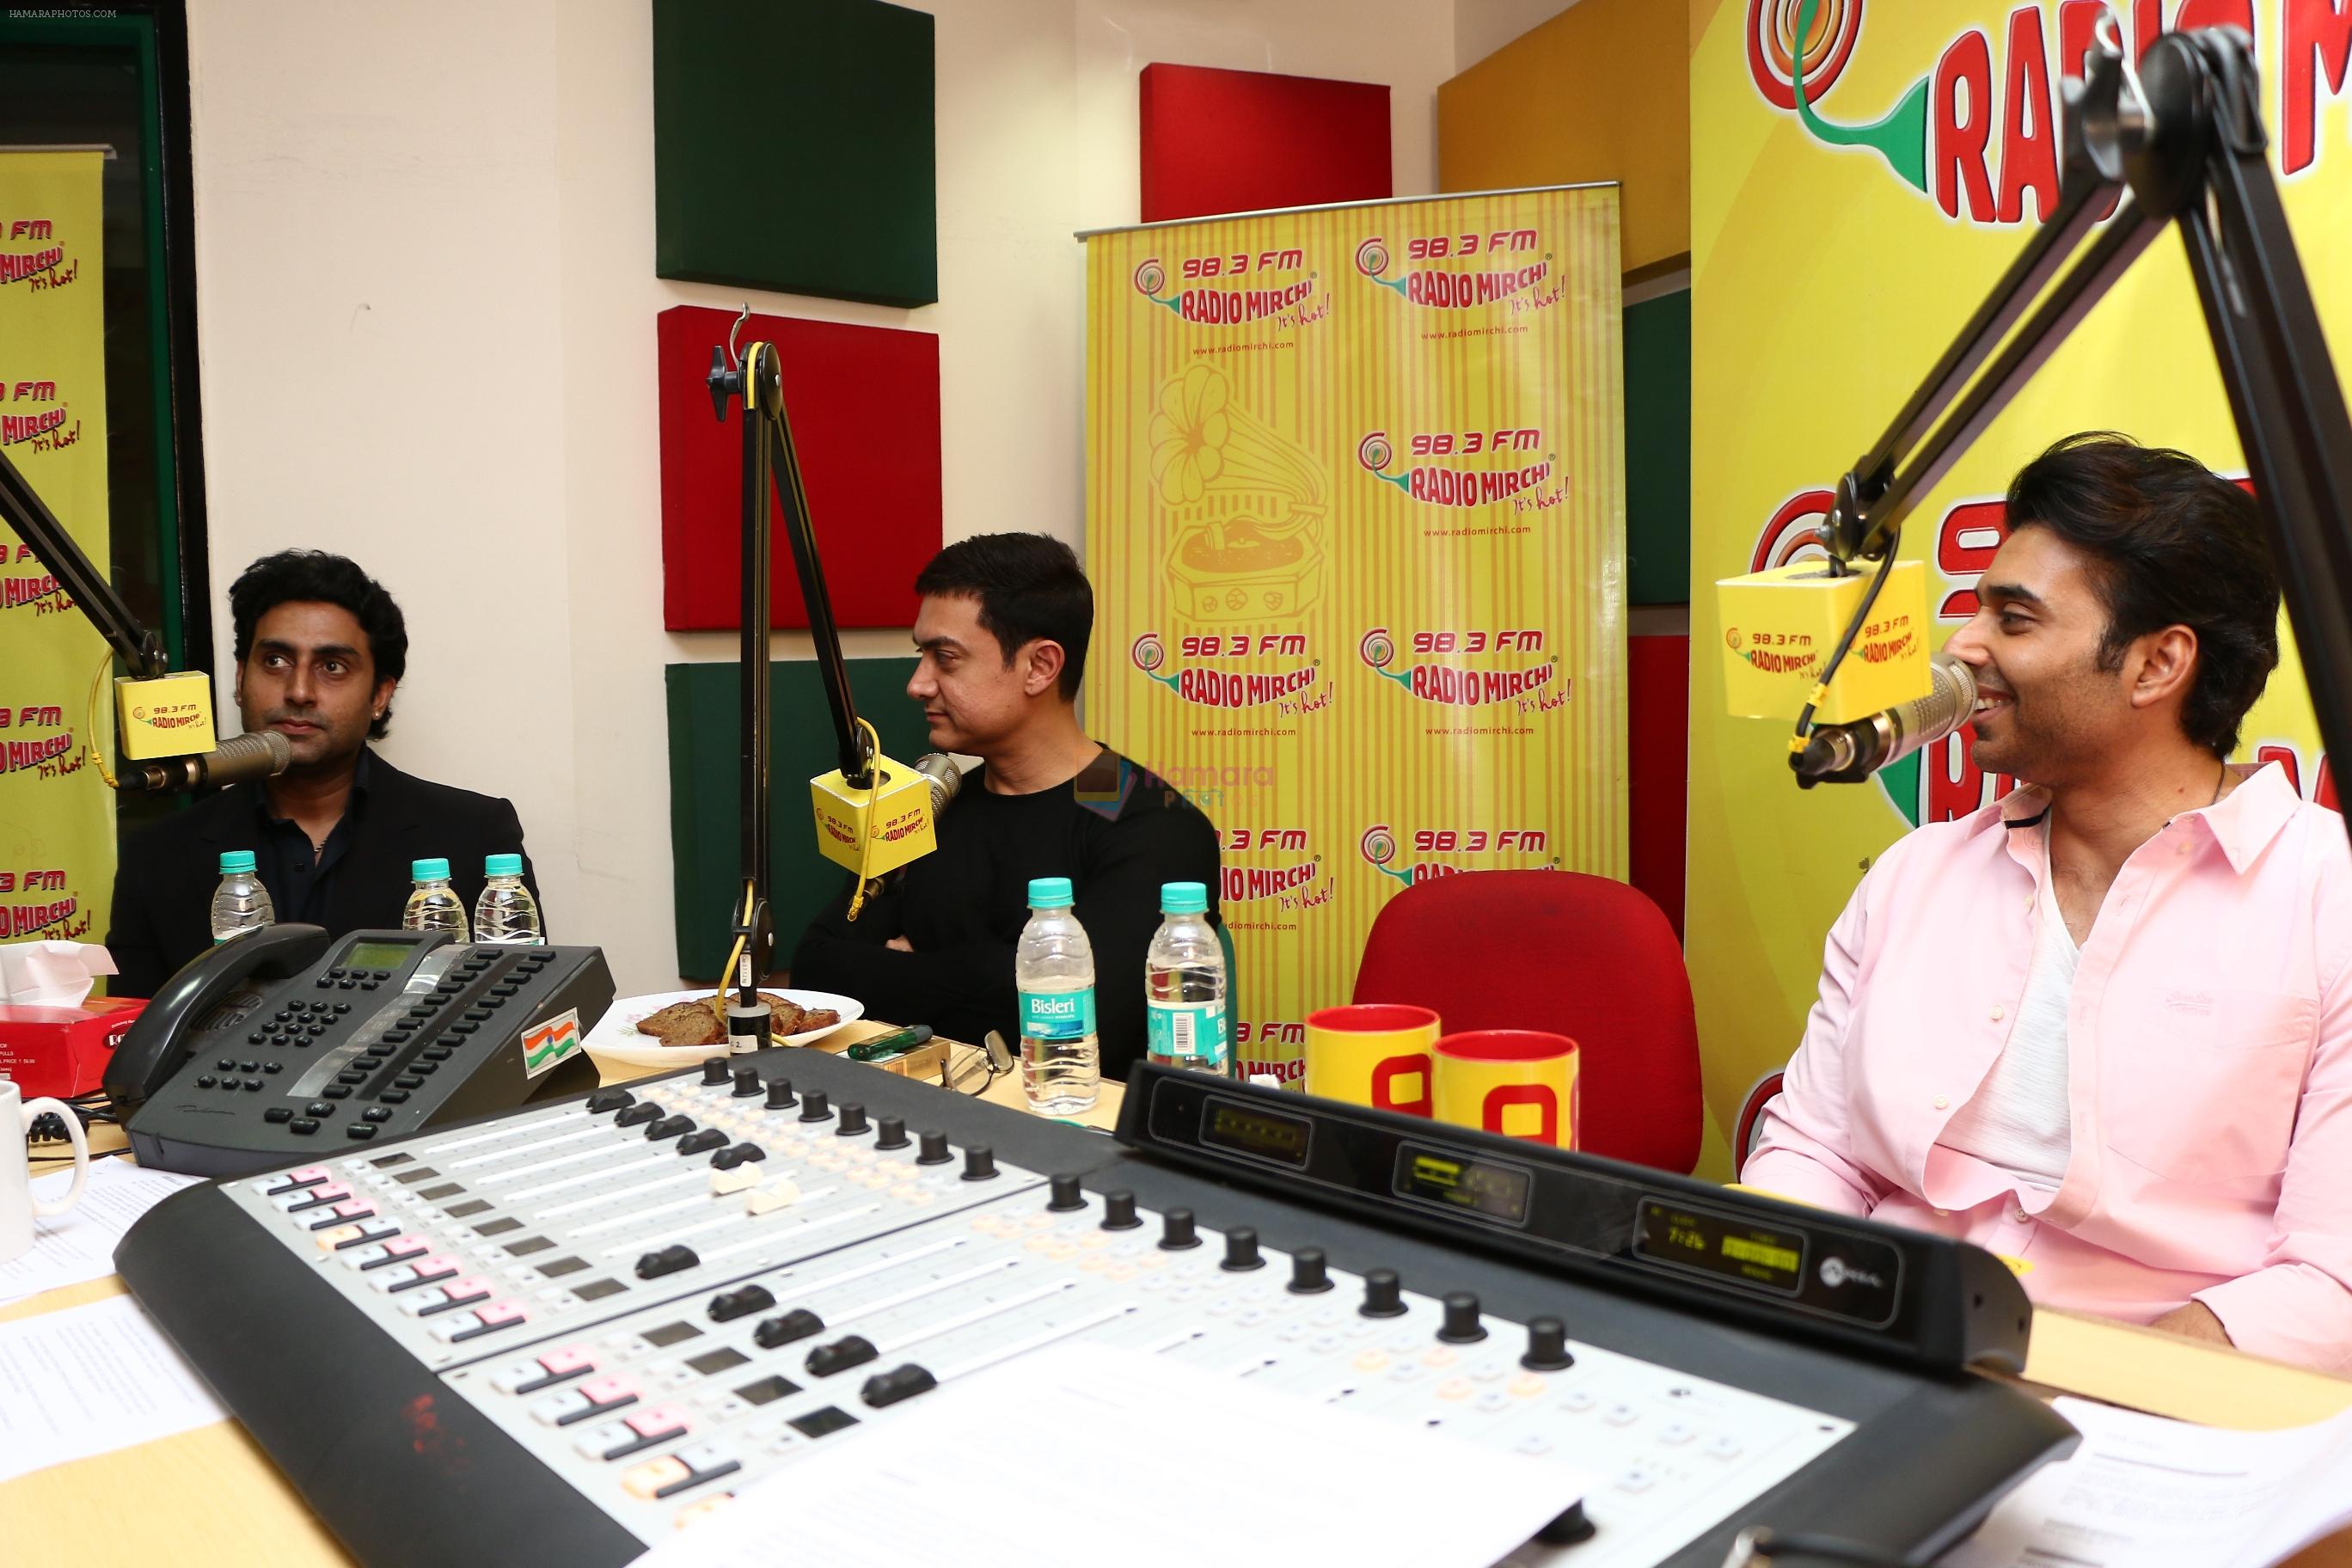 Aamir Khan, Abhishekh Bachchan and Uday Chopra at Radio Mirchi studio for promotion of their upcoming movie Dhoom 3